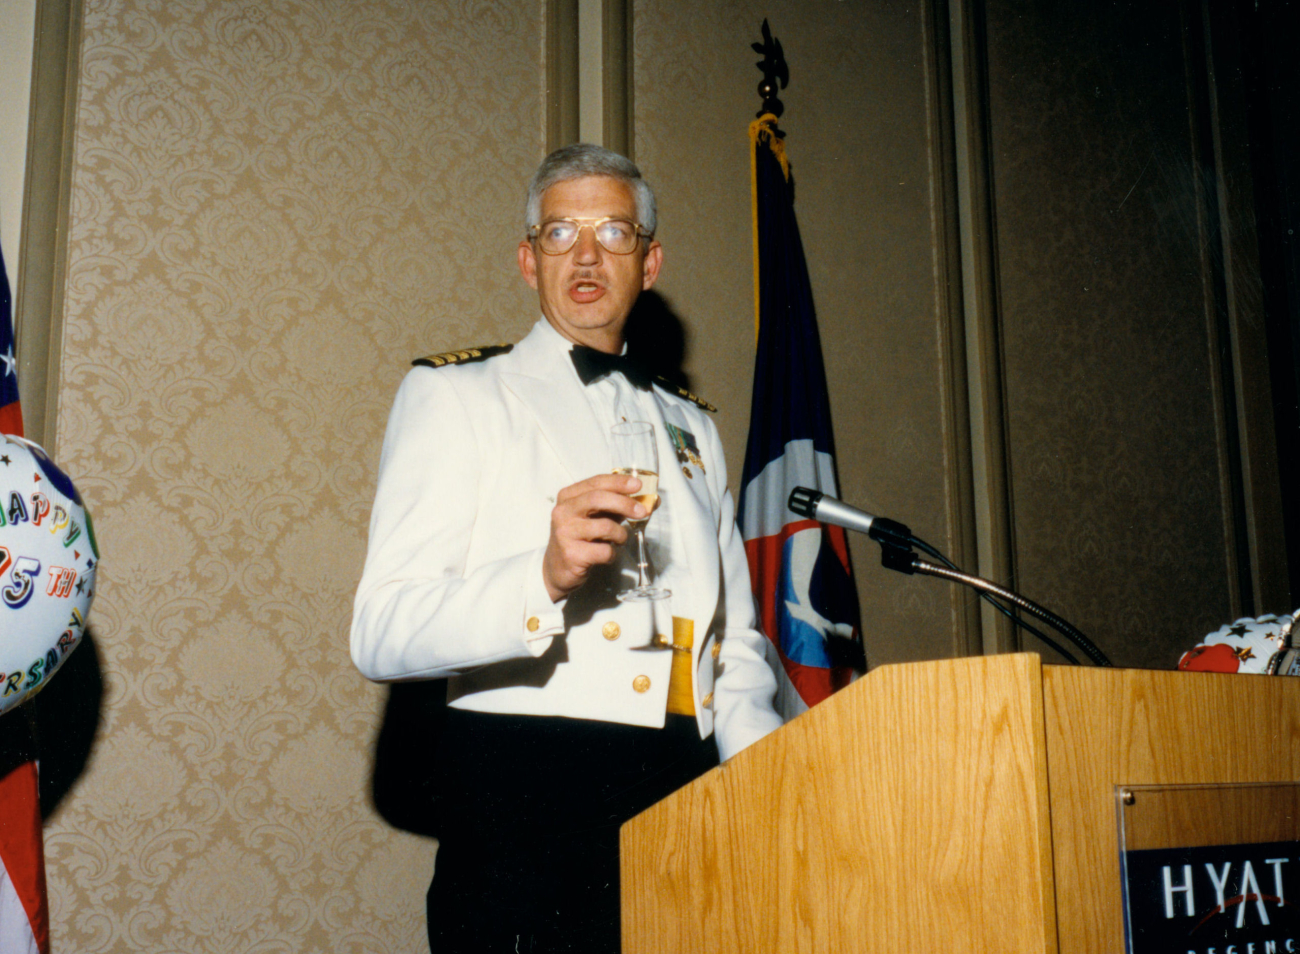 Captain Dave Yeager making a toast at a NOAA Corps Dining Out